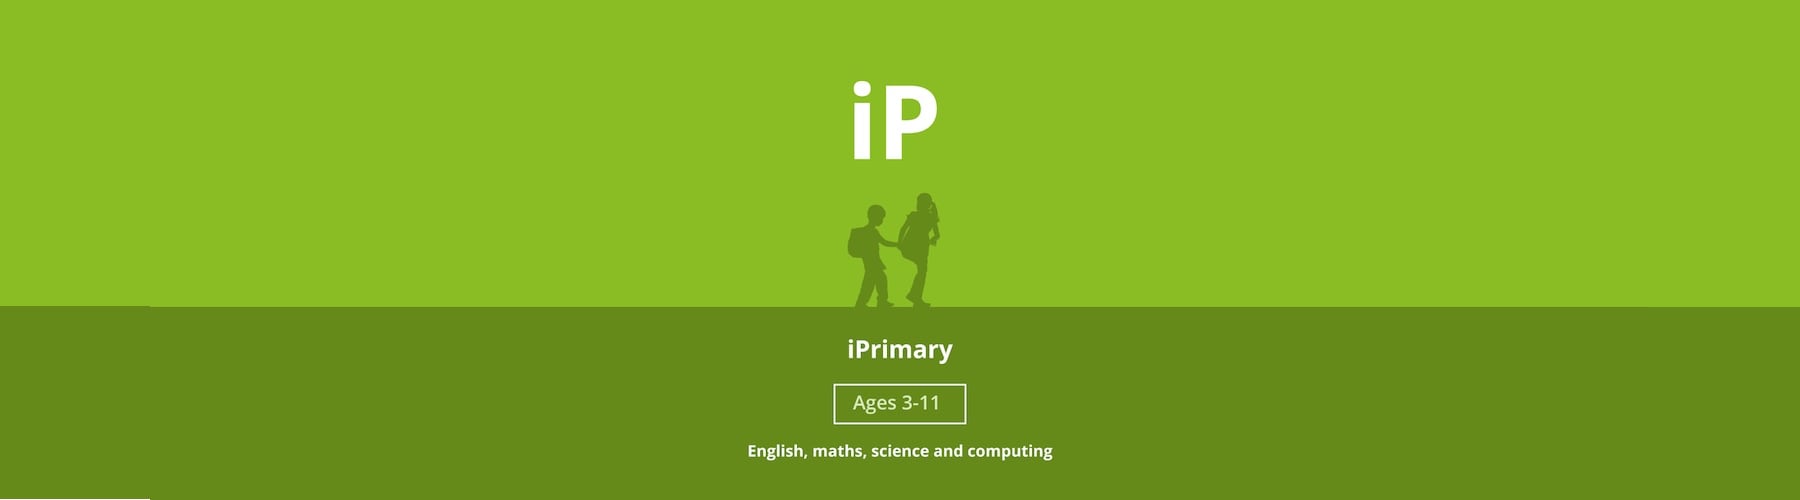 iPrimary banner